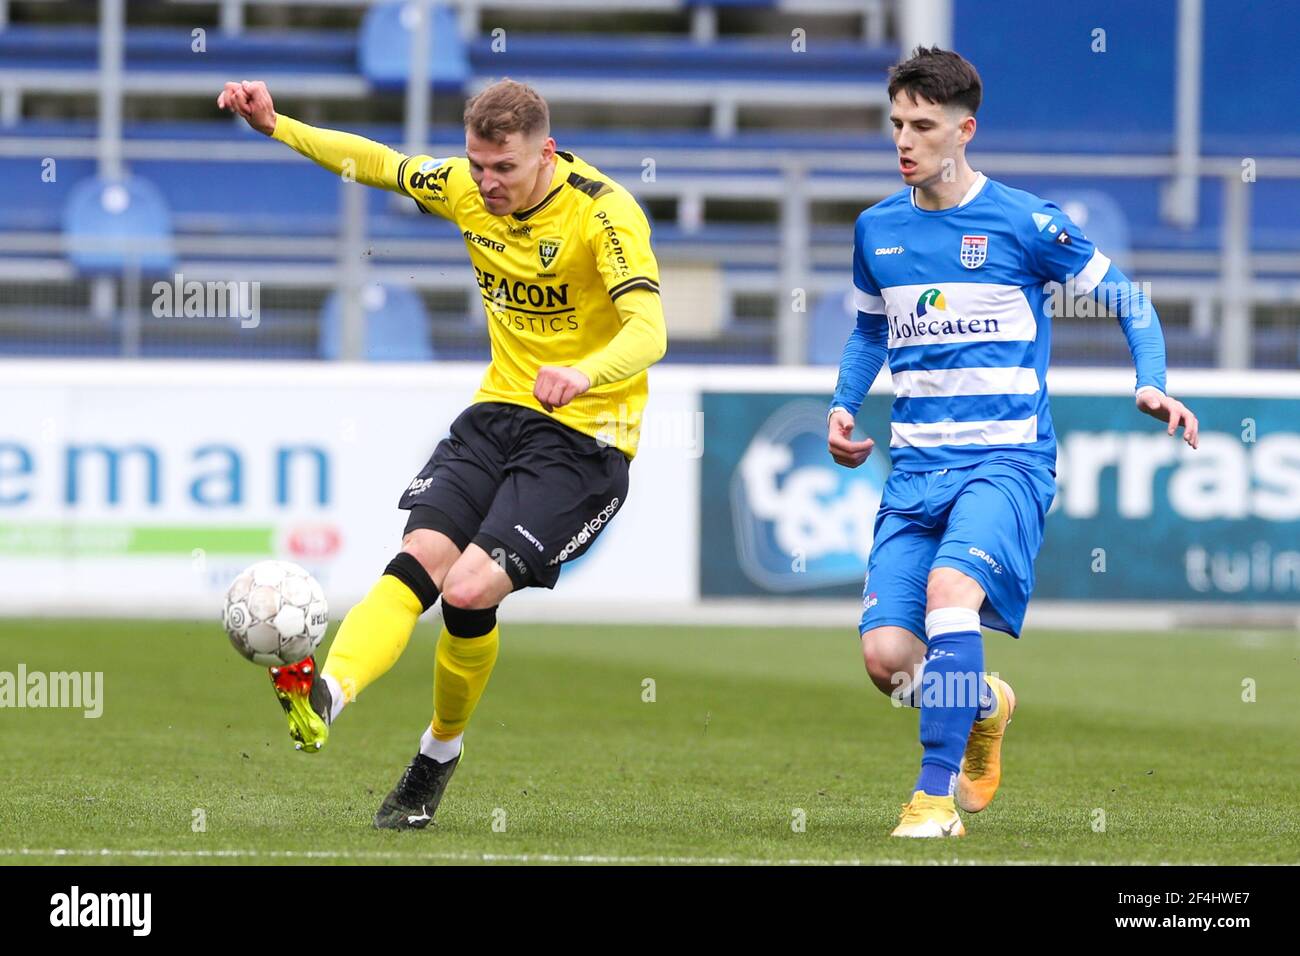 ZWOLLE, NETHERLANDS - MARCH 21: Tobias Pachonik of VVV Venlo and Destan Bajselmani of PEC Zwolle during the Dutch Eredivisie match between PEC Zwolle Stock Photo